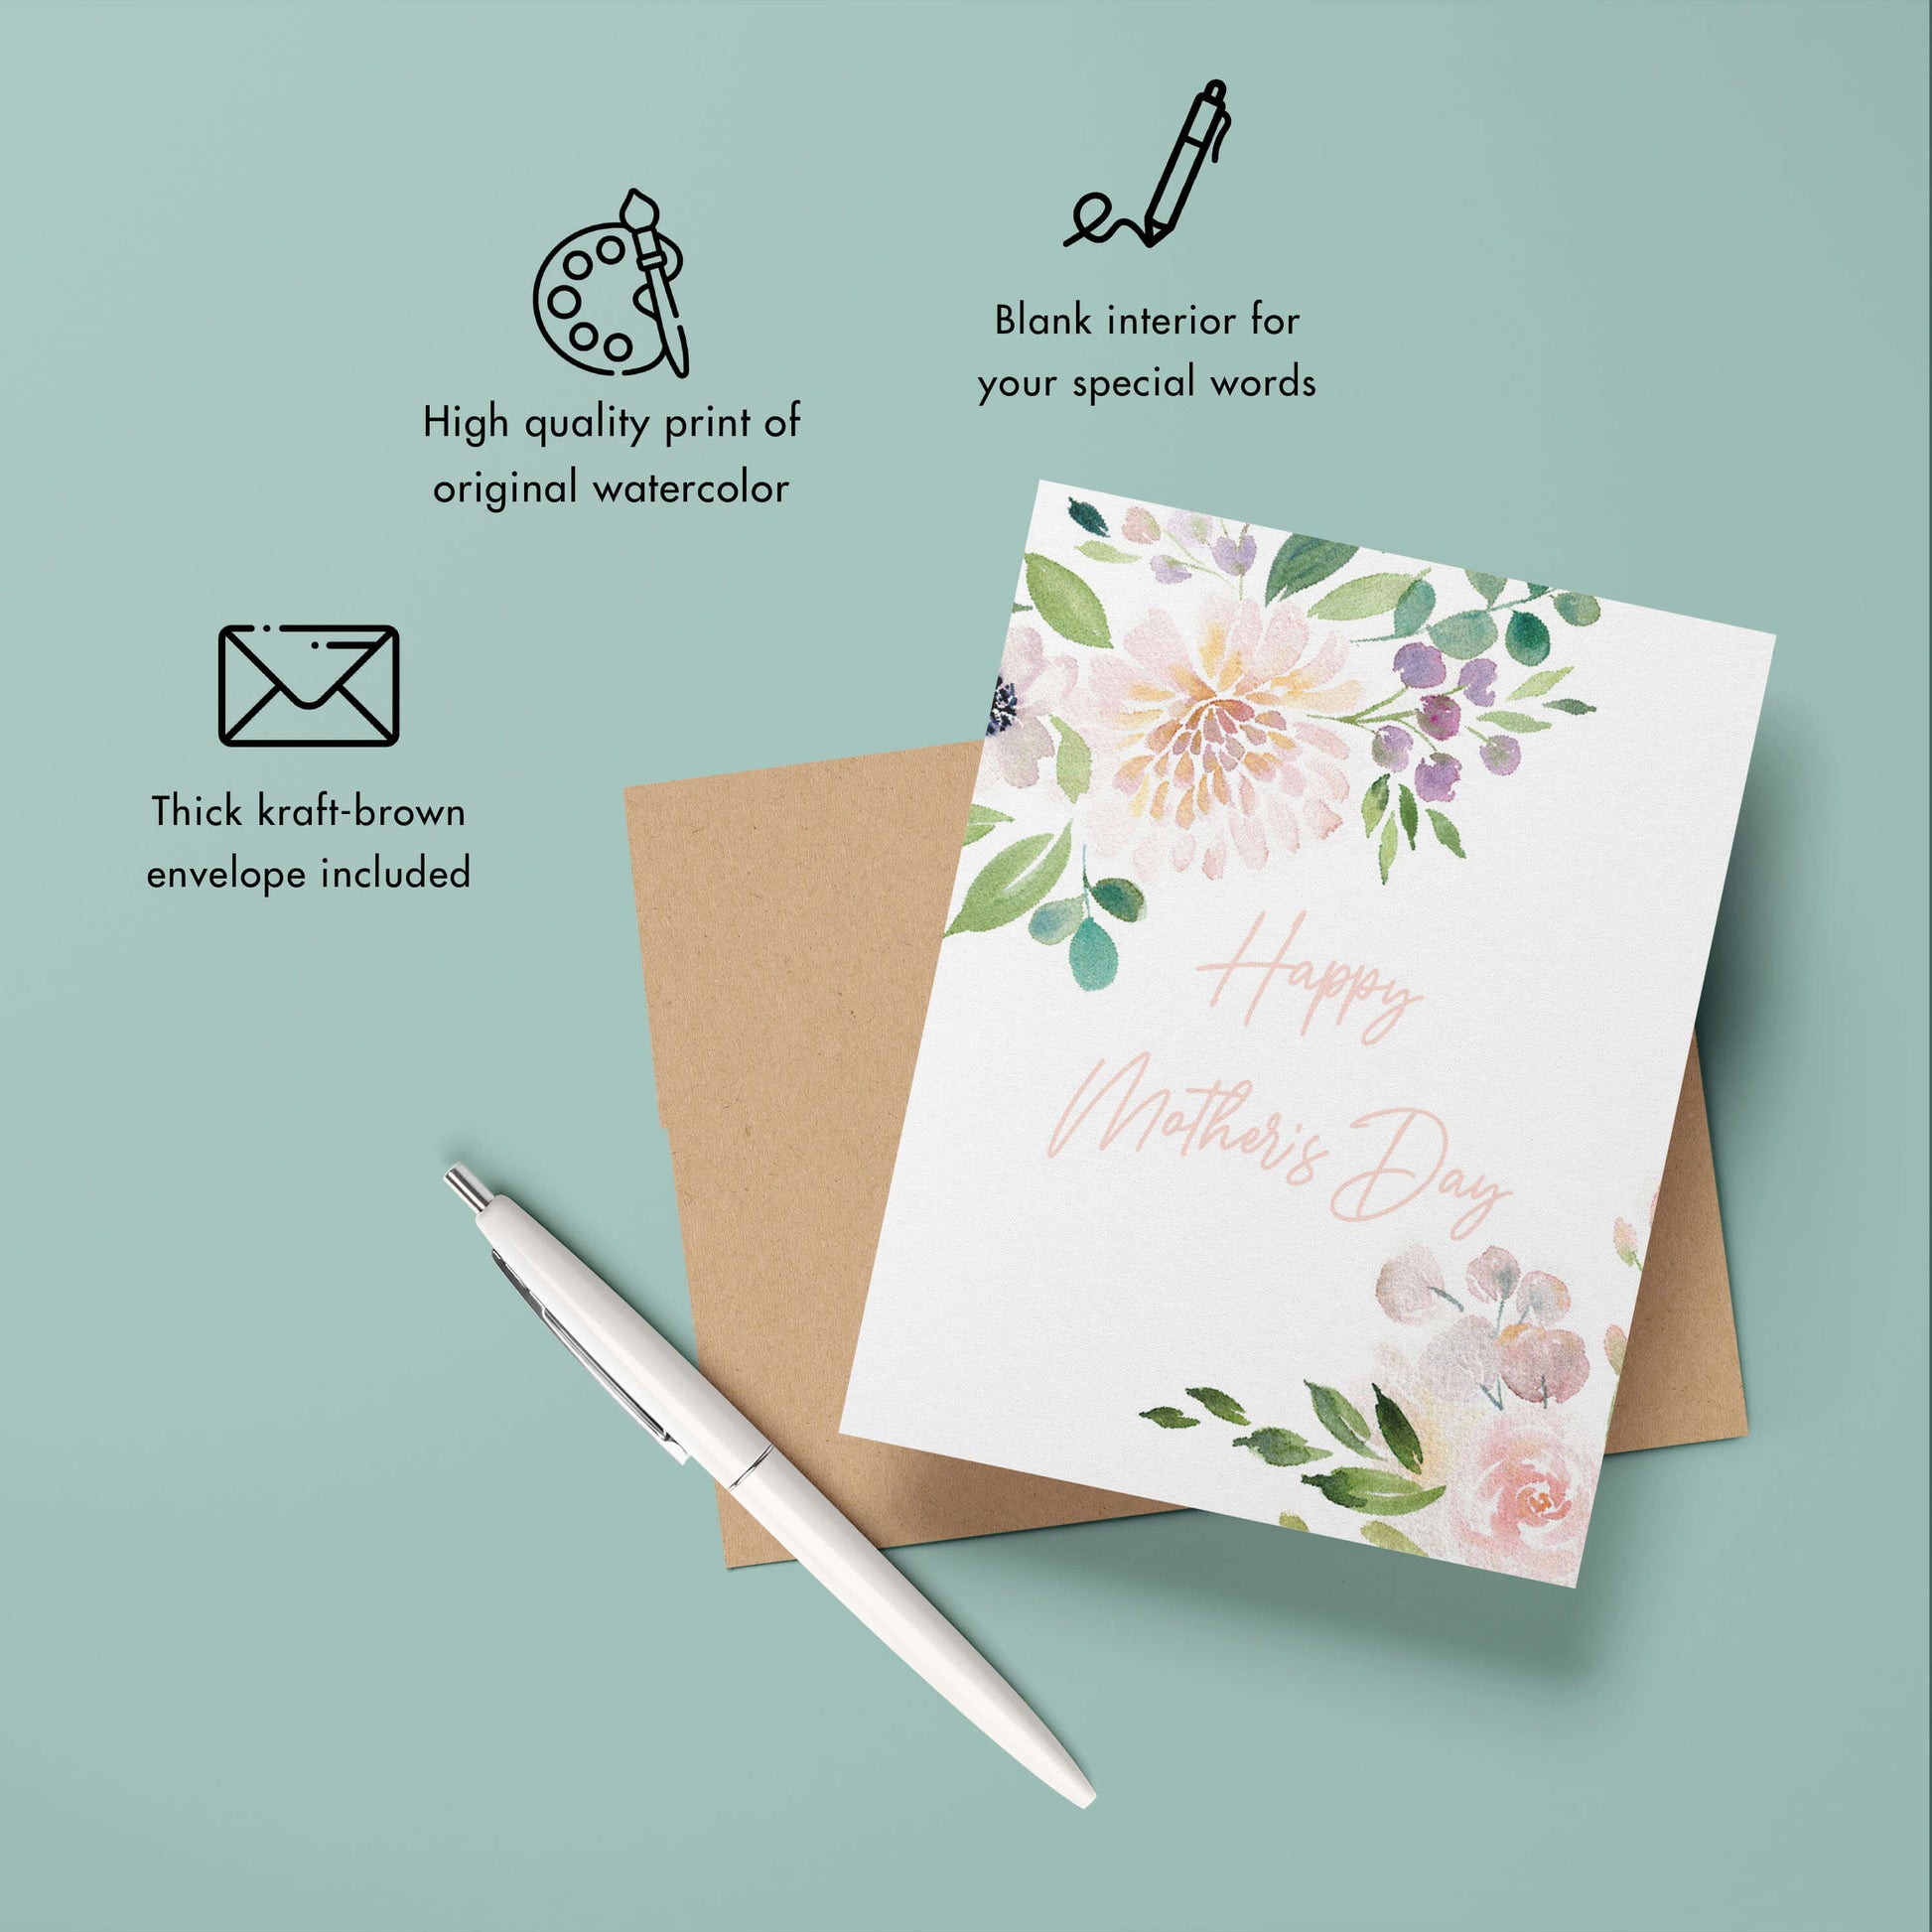 a greeting card with the words happy mother's day written on it